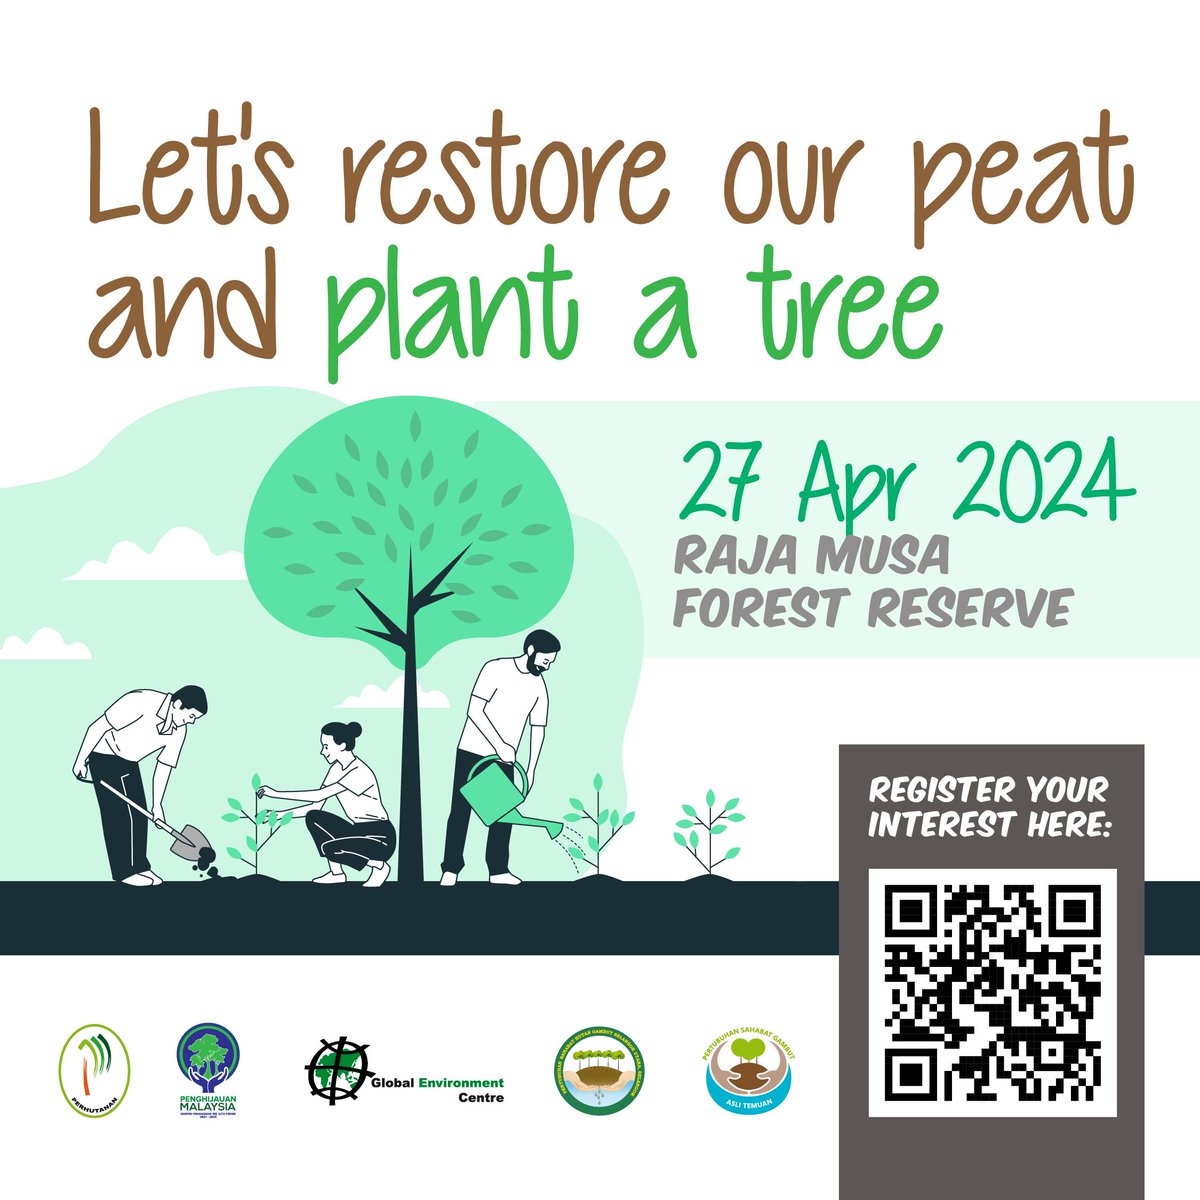 🌳Join us for our enrichment planting activity of the Raja Musa Forest Reserve (RMFR) in Bestari Jaya, Selangor. 📅 27 April 2024 (Saturday) 🕘 From 8:45 am onwards (half-day) Register via this link: bit.ly/317cD1A or scan the QR code below. #treeplanting